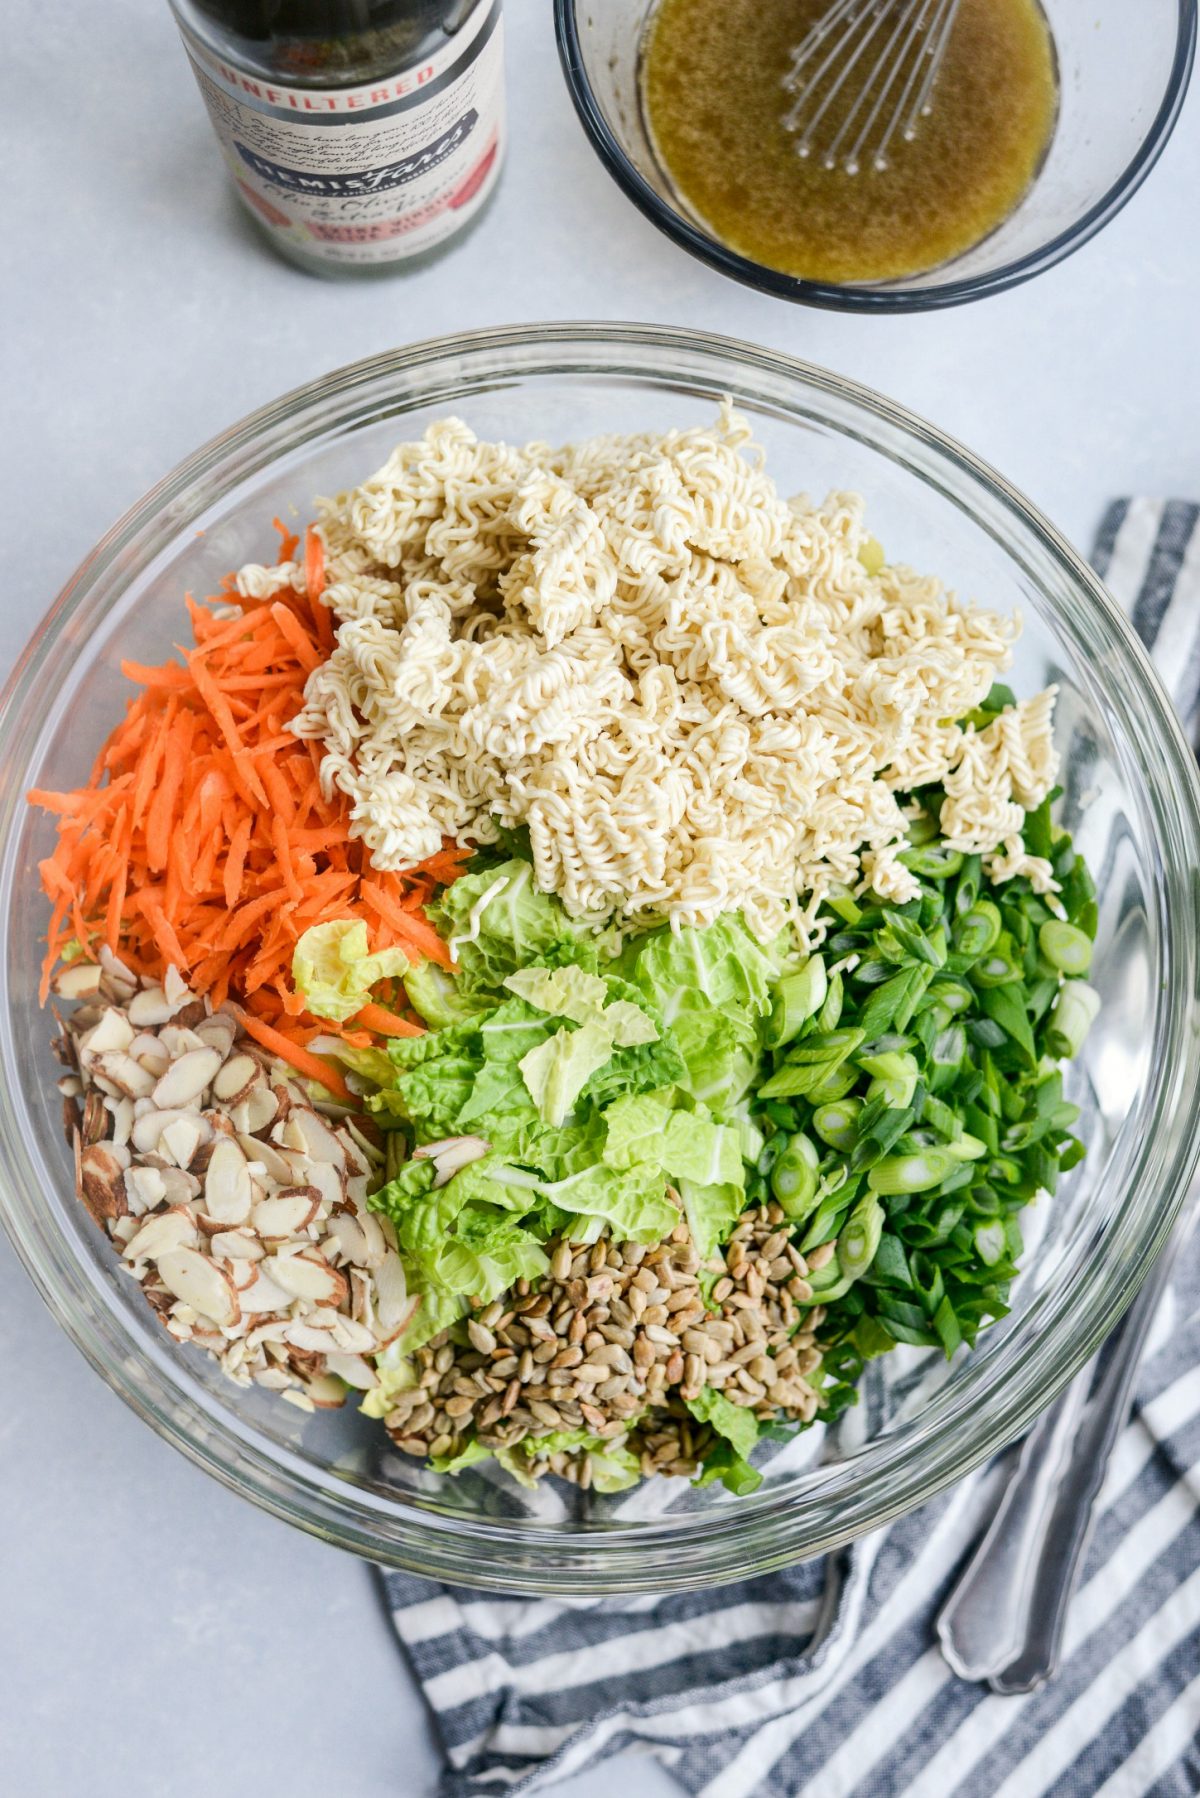 add salad ingredients to a bowl.